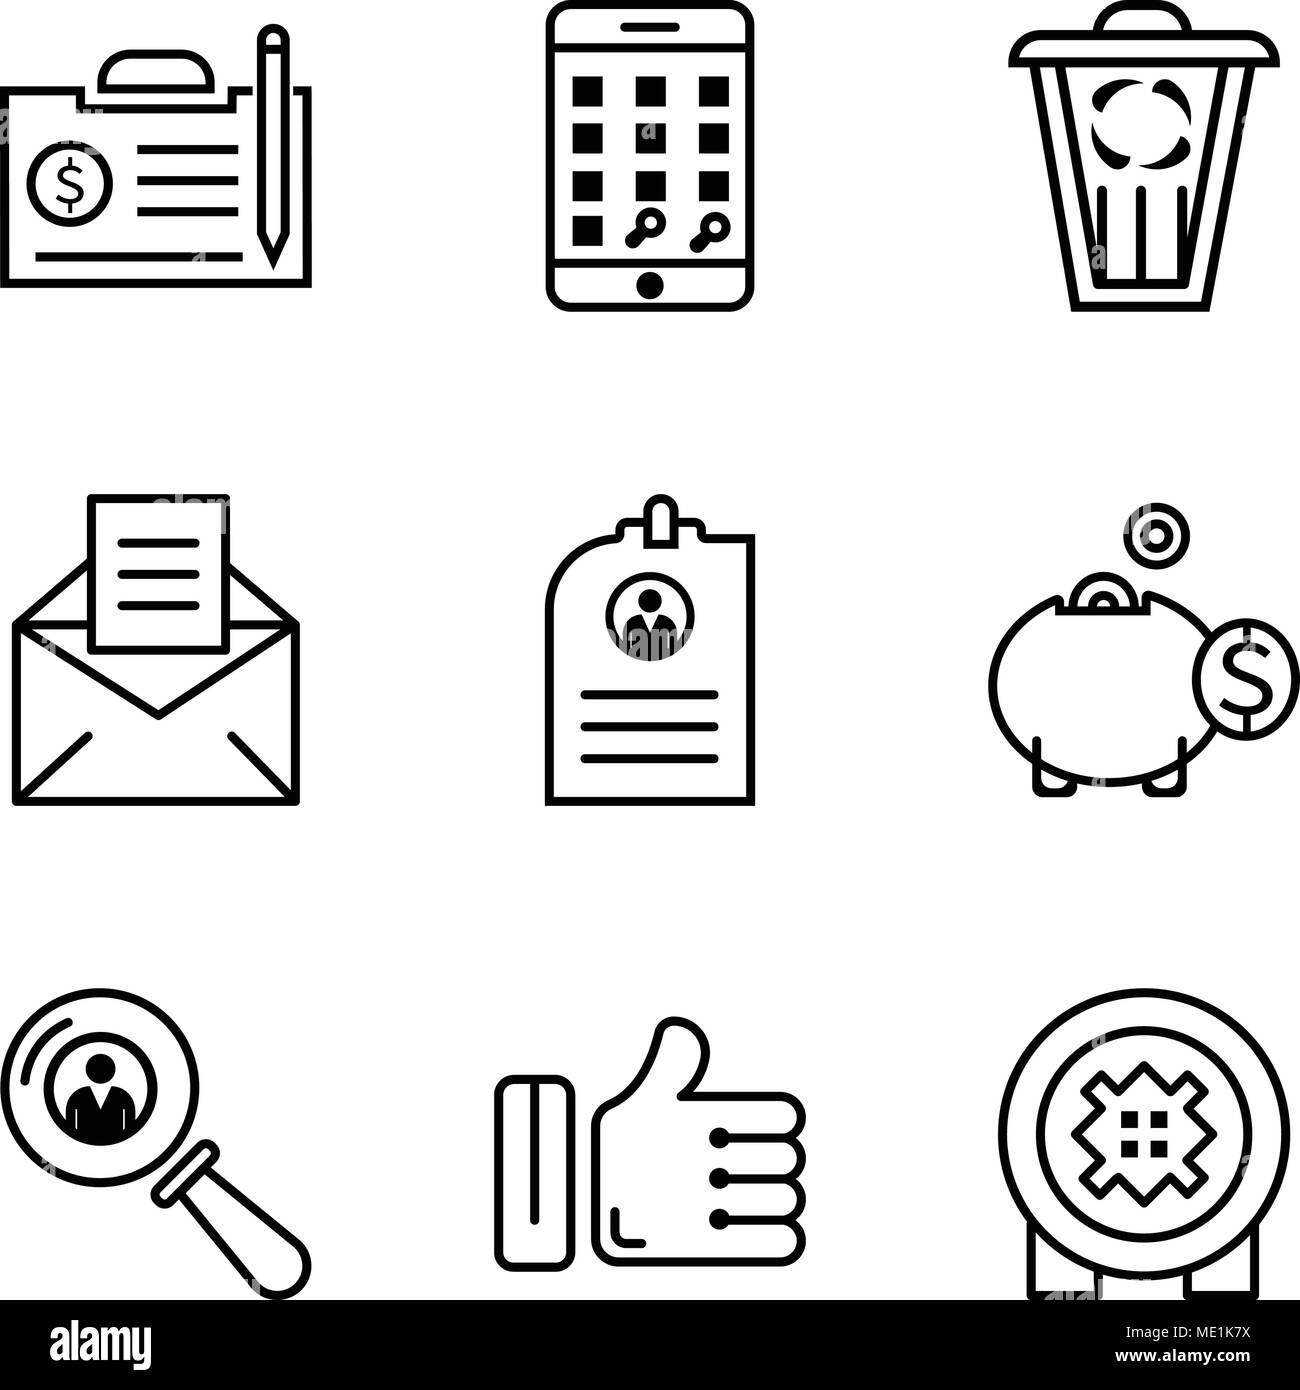 Set Of 9 simple editable icons such as bank safe, like, search person, money box, CV, email, trash, telephone, contract, can be used for mobile, web U Stock Vector